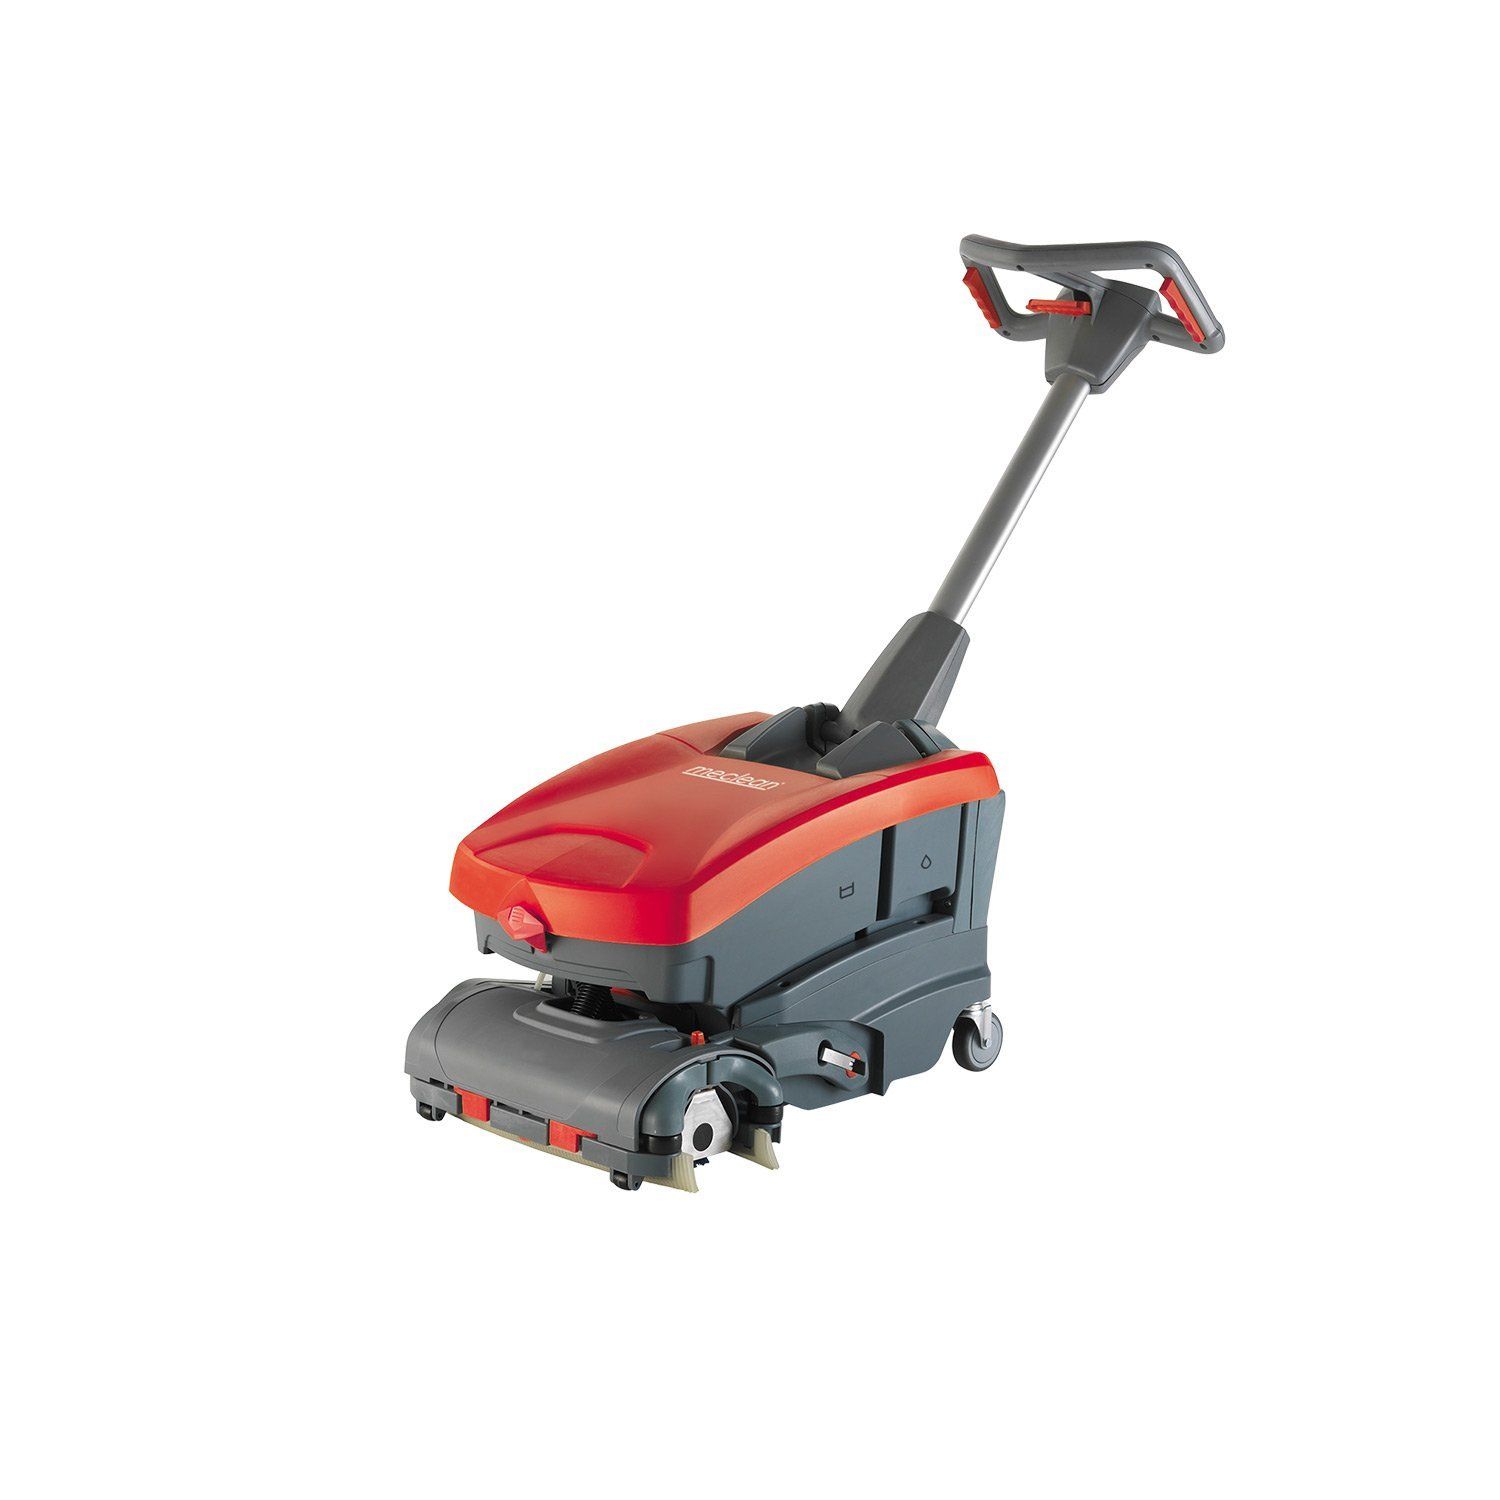 Meclean professional walk-behind scrubber dryer battery powered ROTOSCRUB